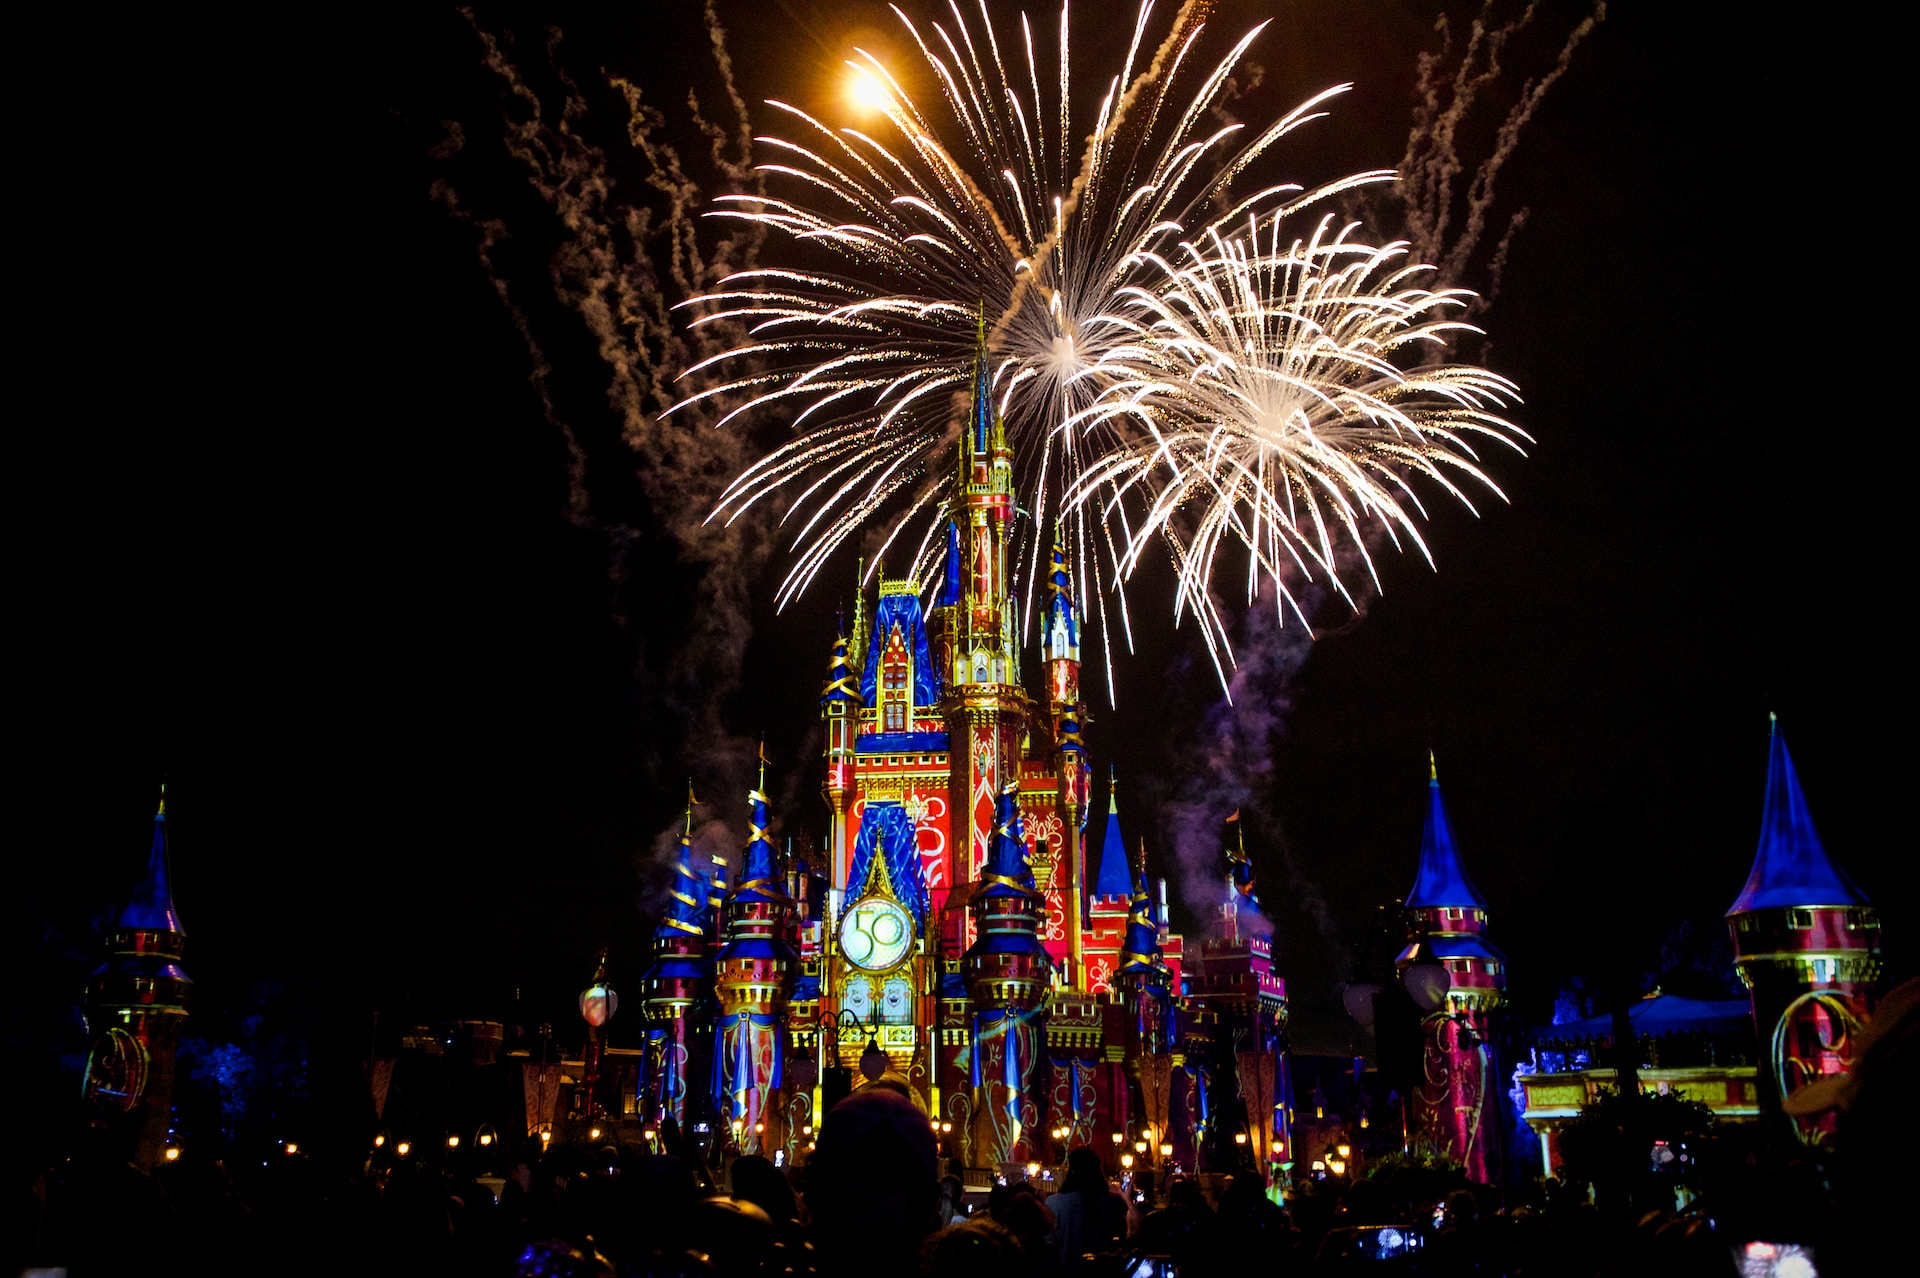 Disney castle at night with fireworks exploding around it.